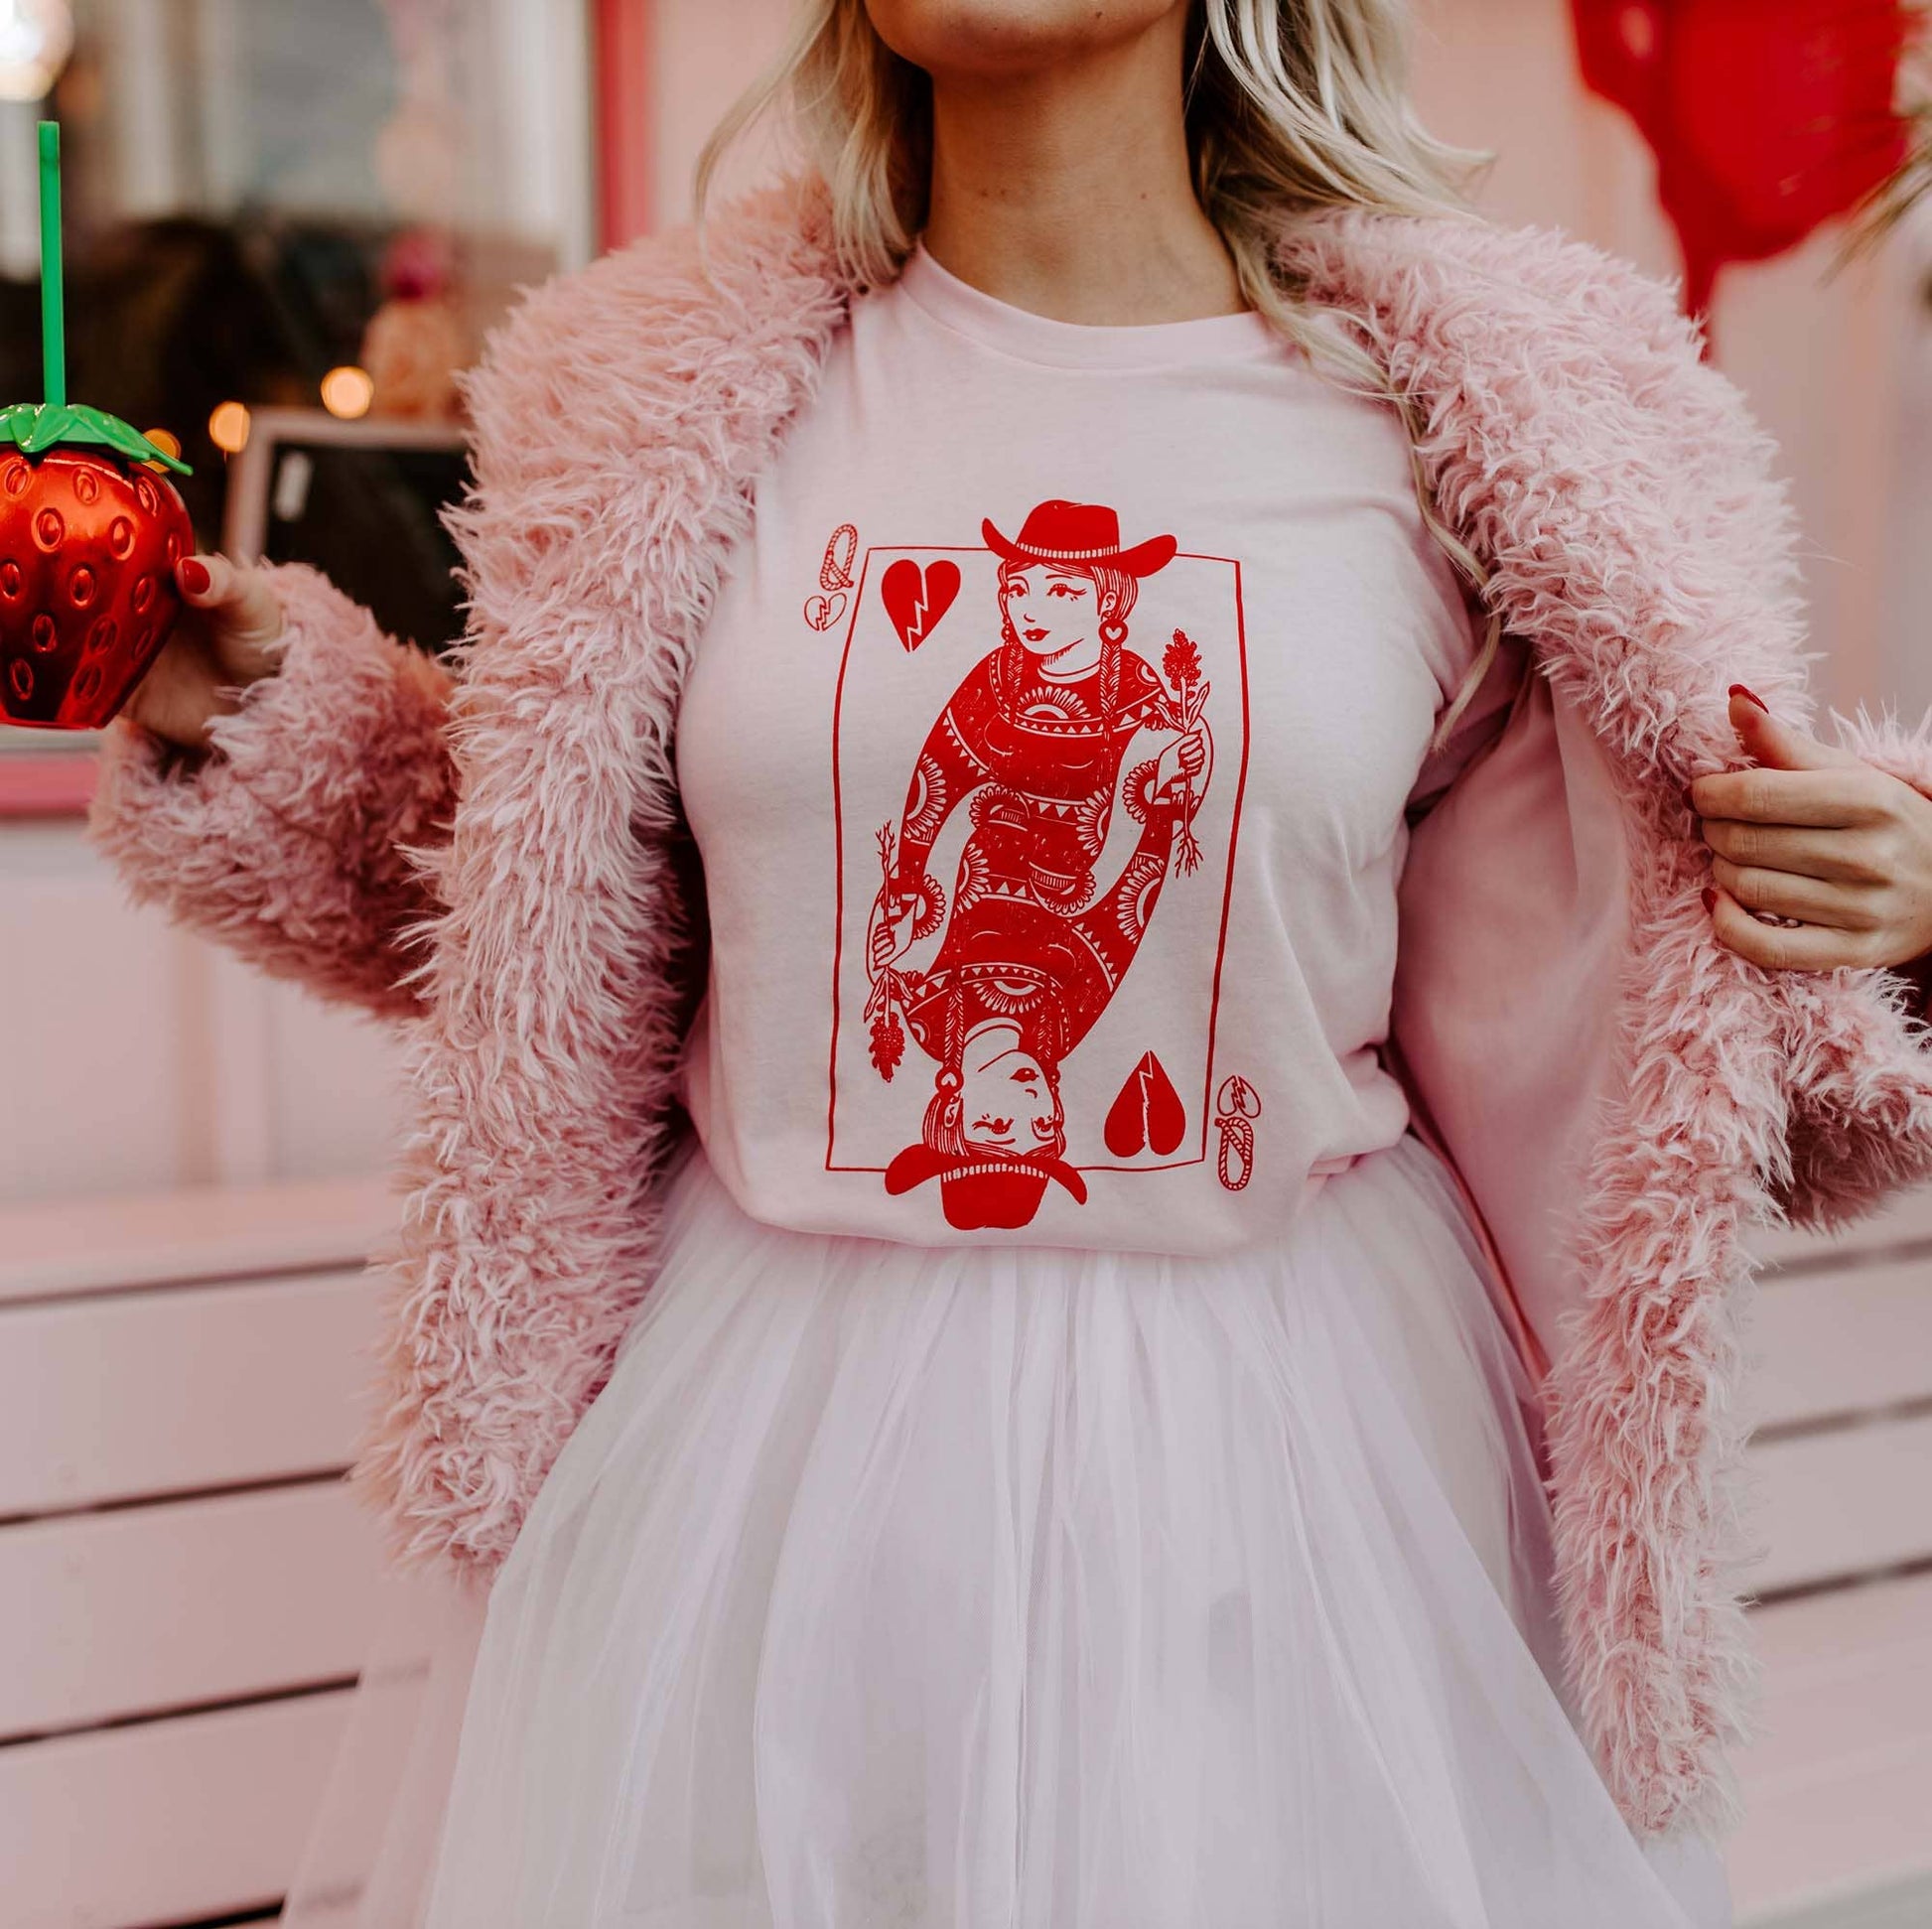 Queen of Hearts Pink Shirt, Valentine's Shirt - Whimsical Details